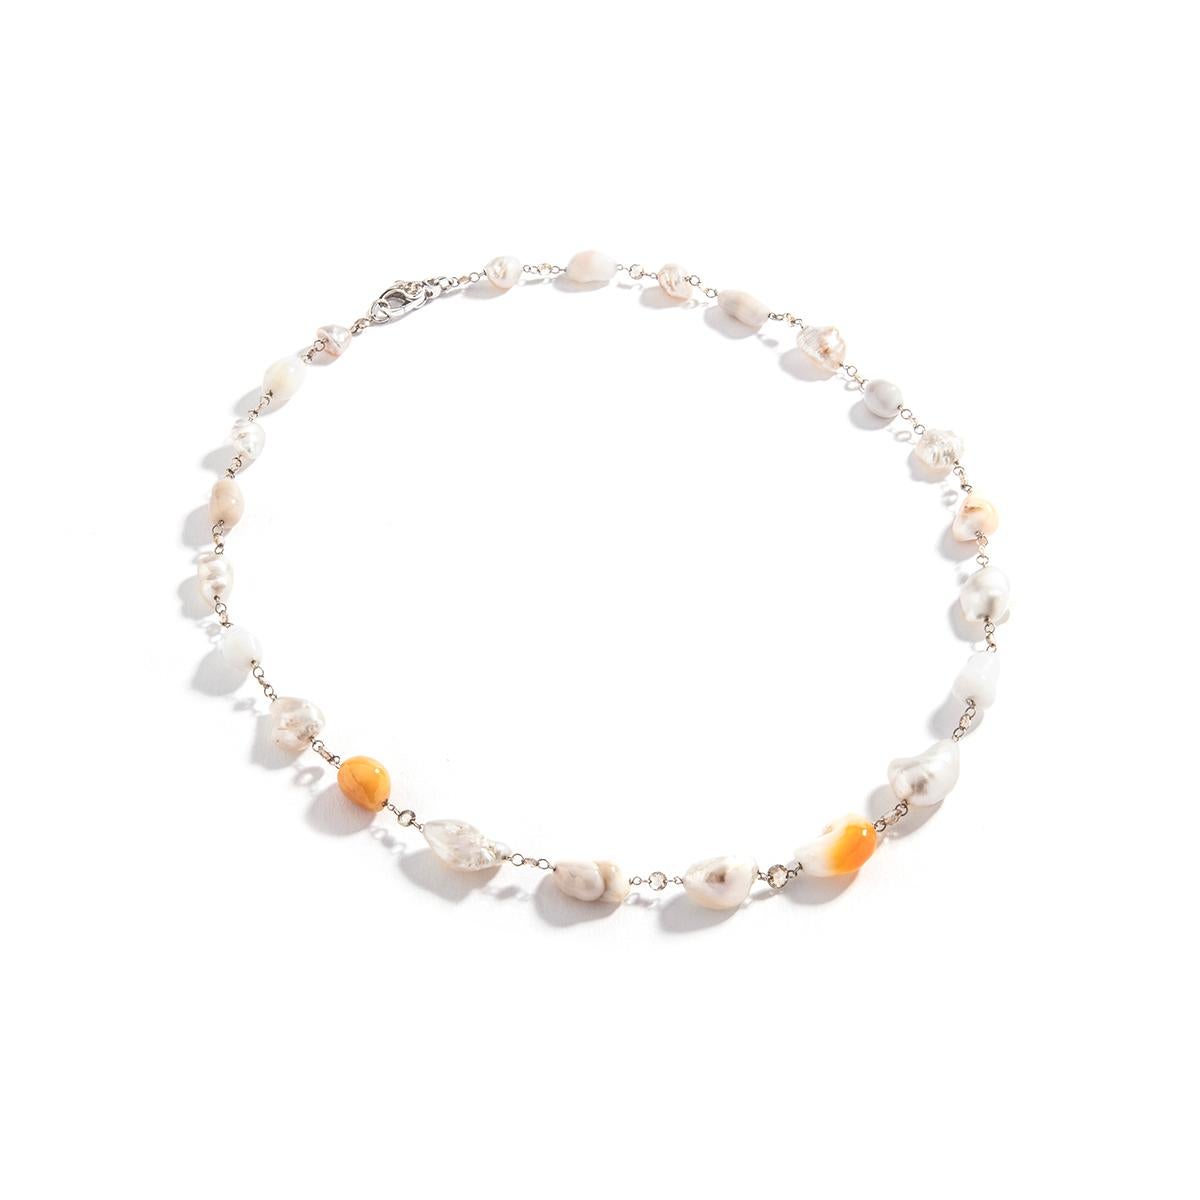 Baroque Culture Melo and White Pearl and Rose cut Diamond Necklace. White gold 18k.
Natural Pearl color.
Diamond Natural brown color.
Length: 18.50 inches (47.00 centimeters).
Total weight: 24.19 grams.

Former property of a French Lady.

We are